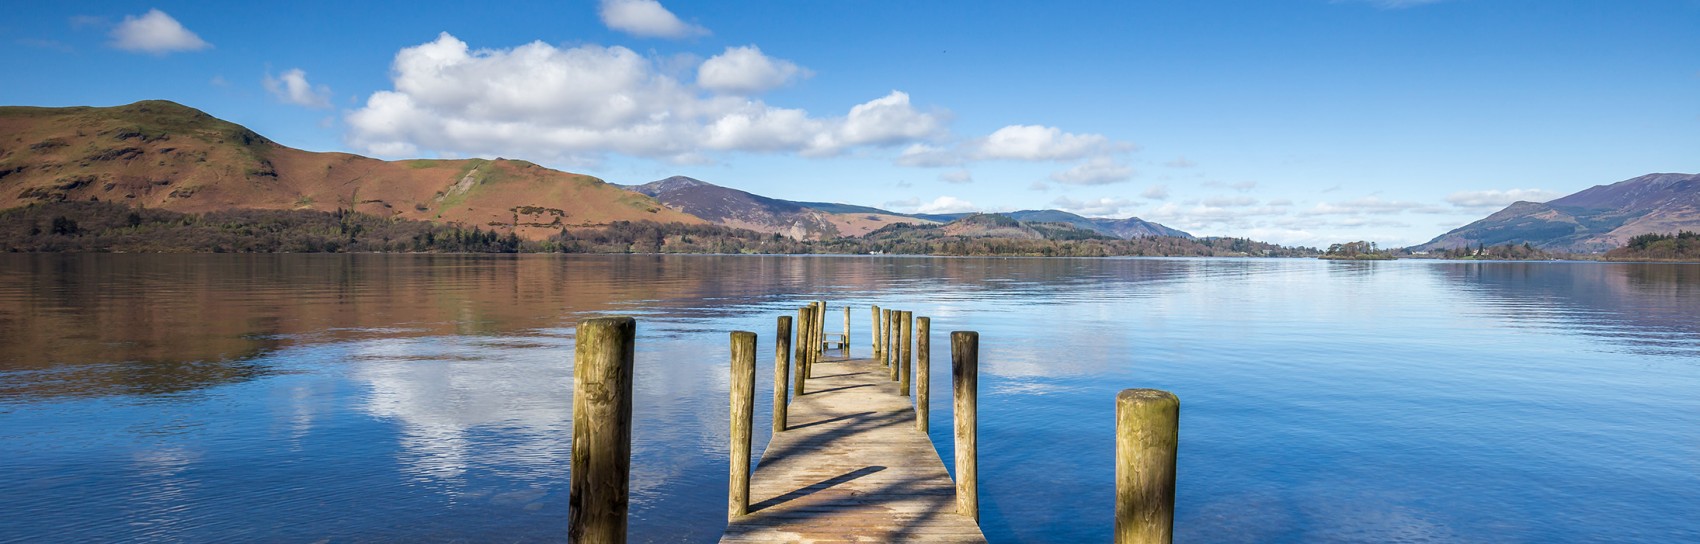 Wooden jetty in the Lake District. Photograph by DAVE ZDANOWICZ